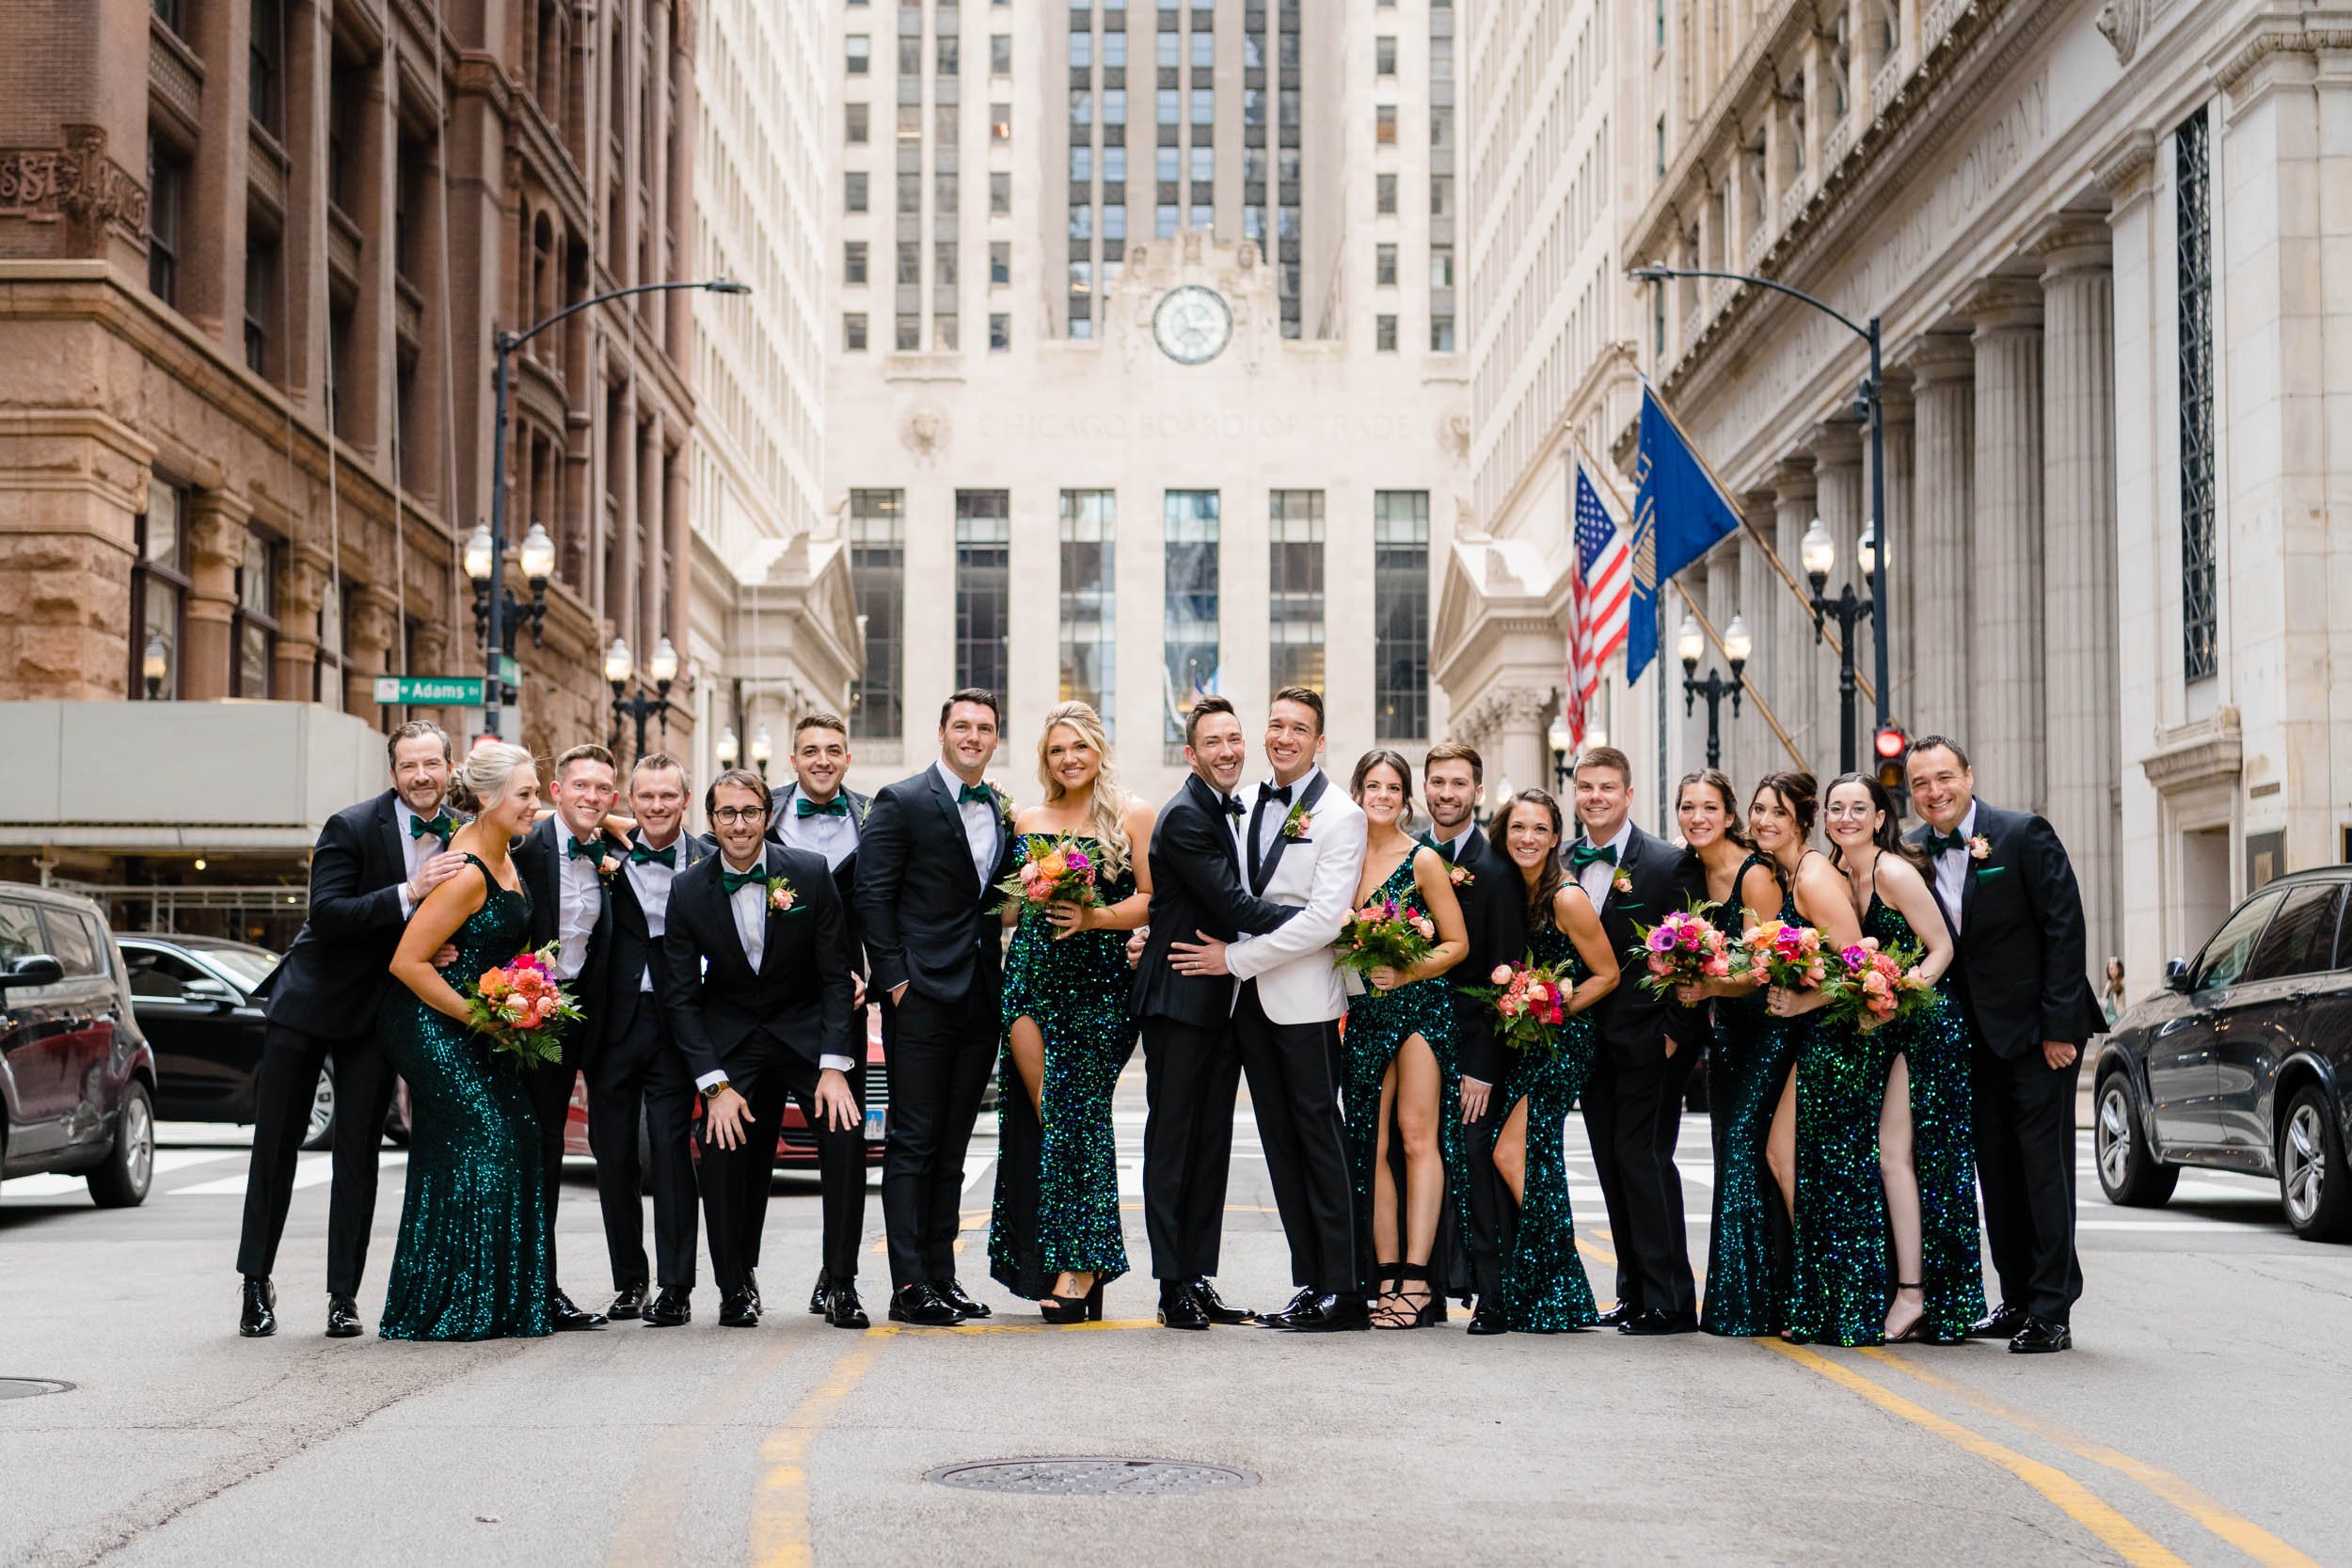 Chicago Board of Trade | Outdoor wedding party photo | Chicago IL